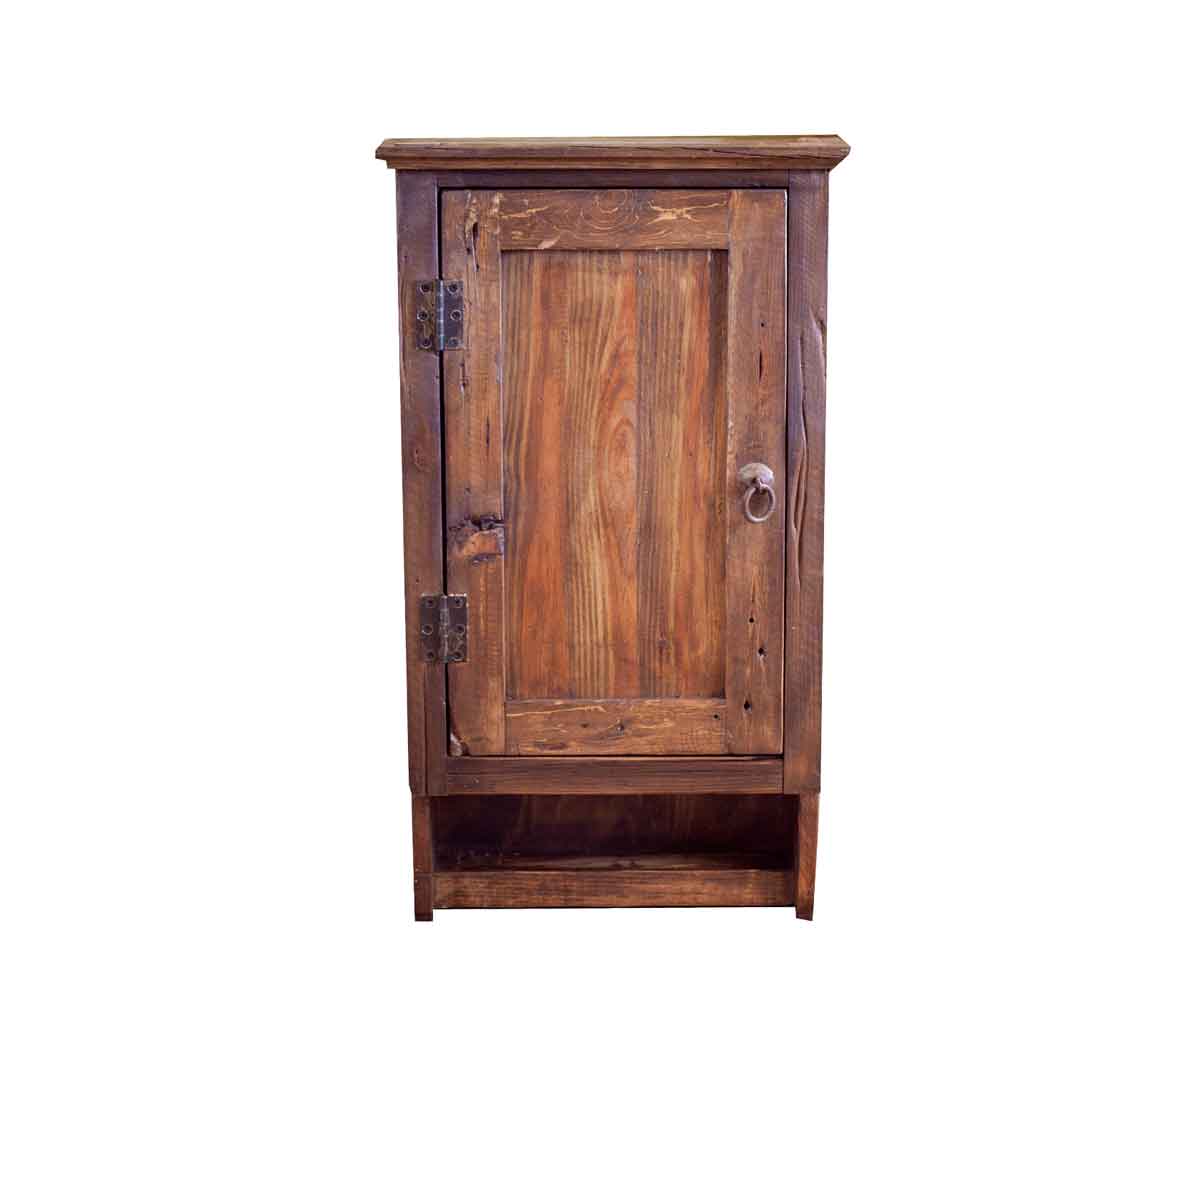 Purchase Reclaimed Medicine Cabinet Online Made From 100 Old Wood